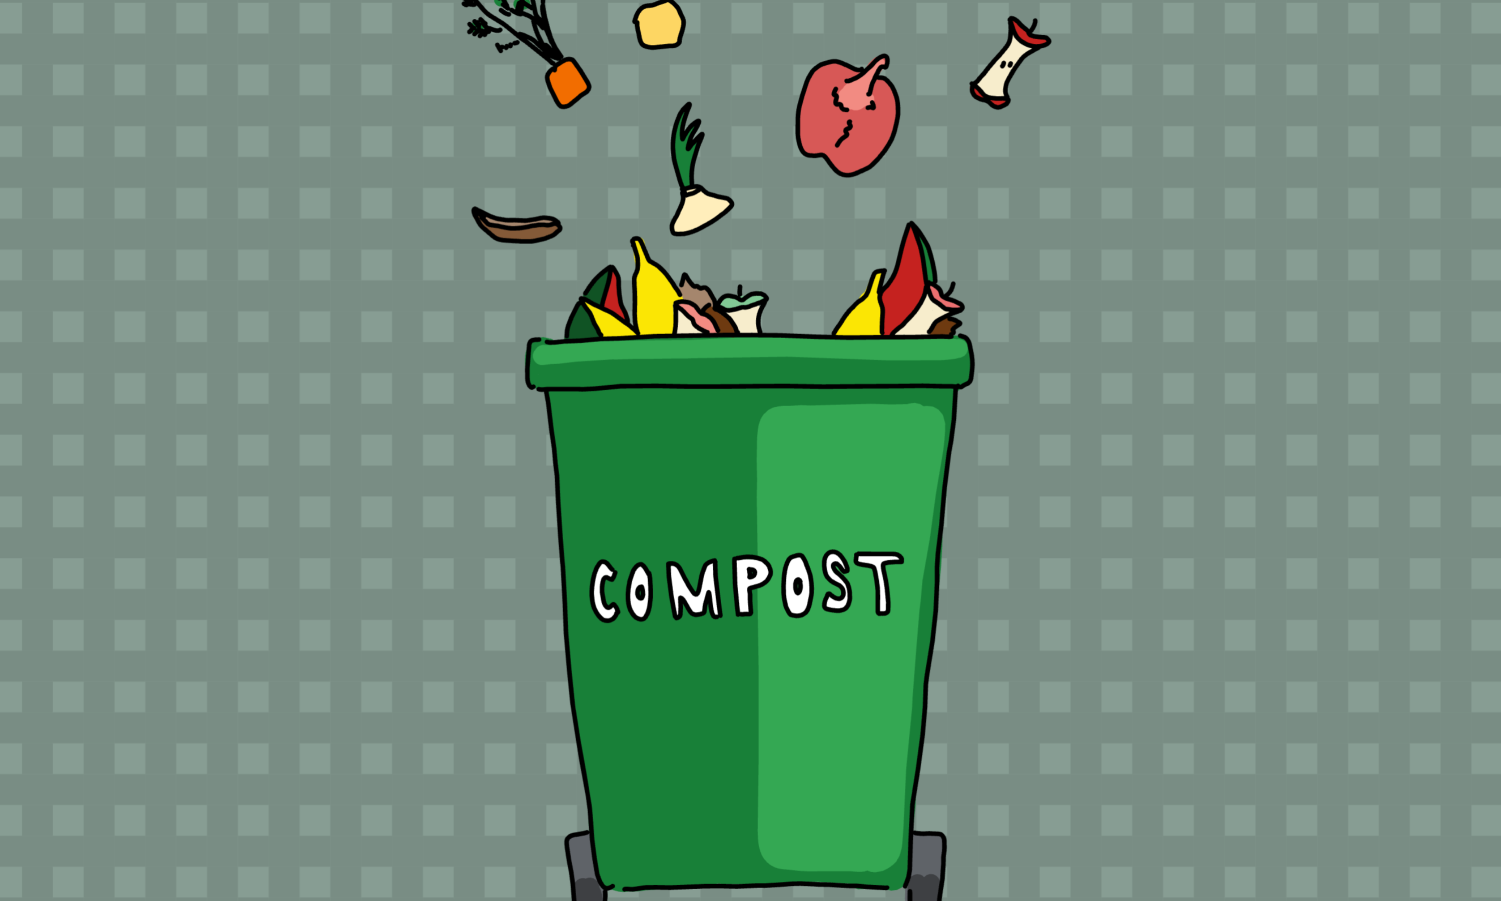 Food+waste+falling+into+a+green+compost+bin+over+a+checkered+background.